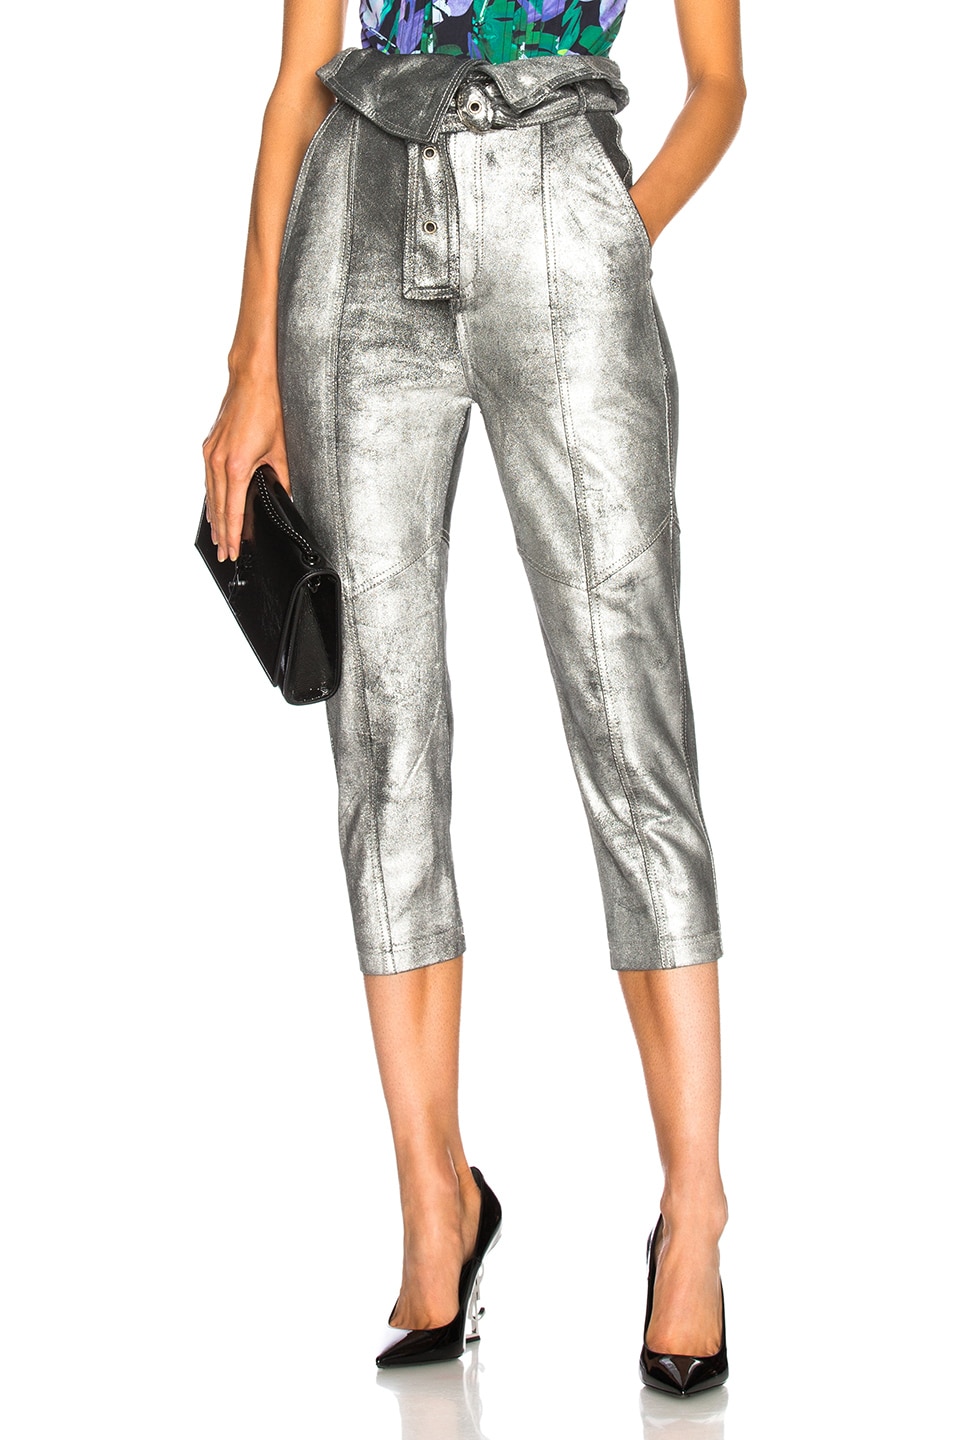 Image 1 of Marissa Webb Anniston Leather Pant in Washed Silver